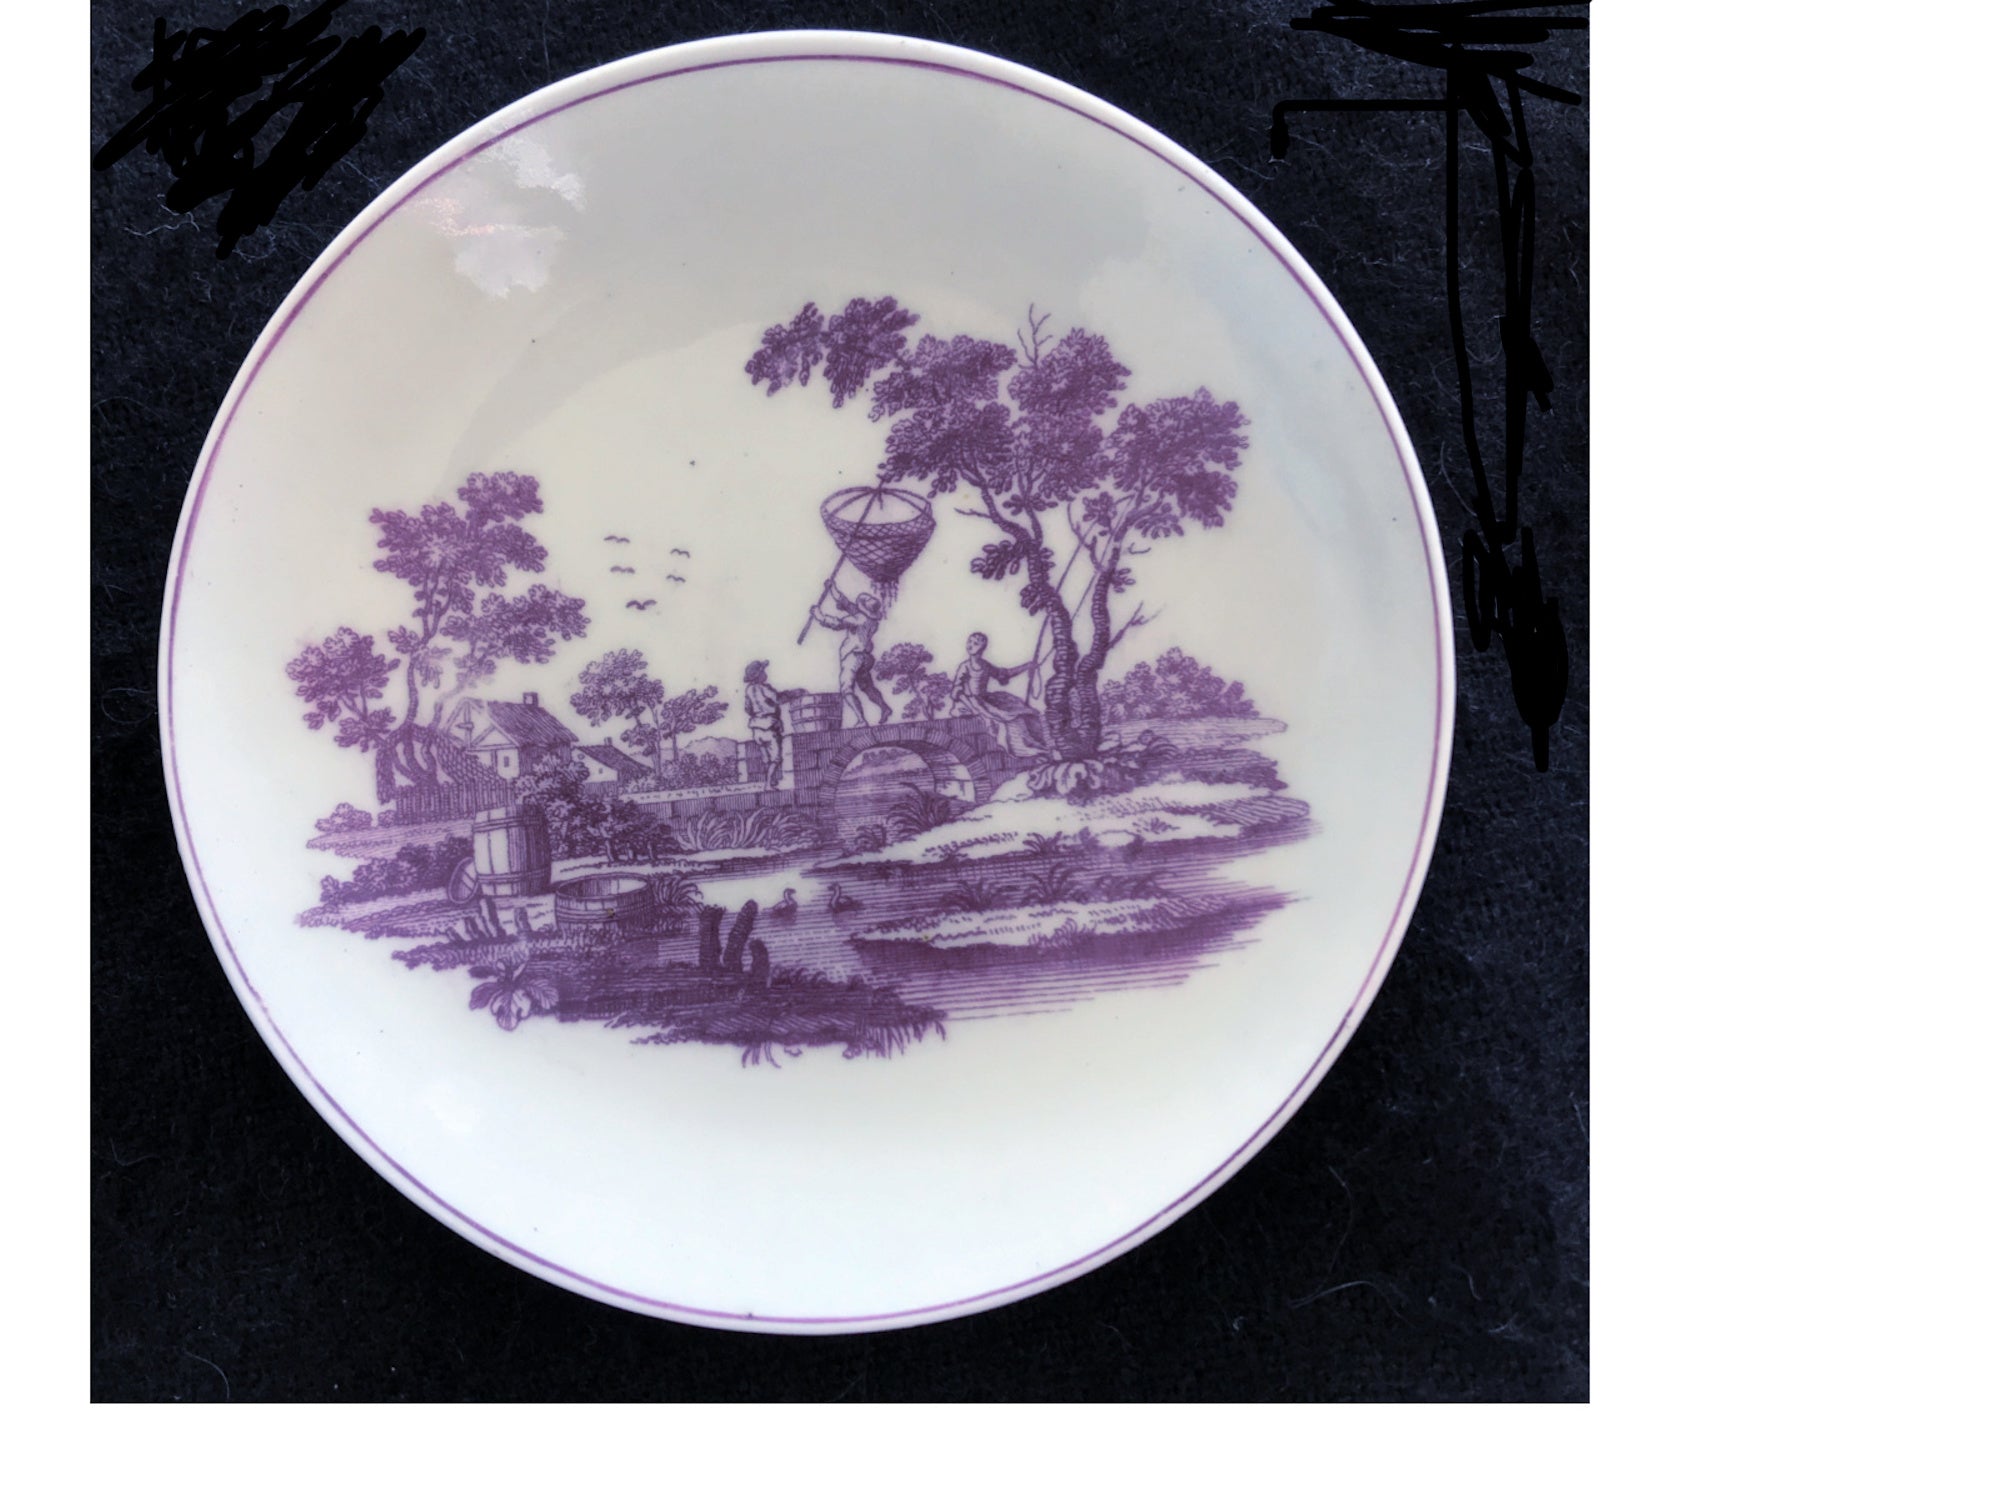 SOLD 18th Century Worcester Porcelain Teabowl and Saucer, Printed in Purple.